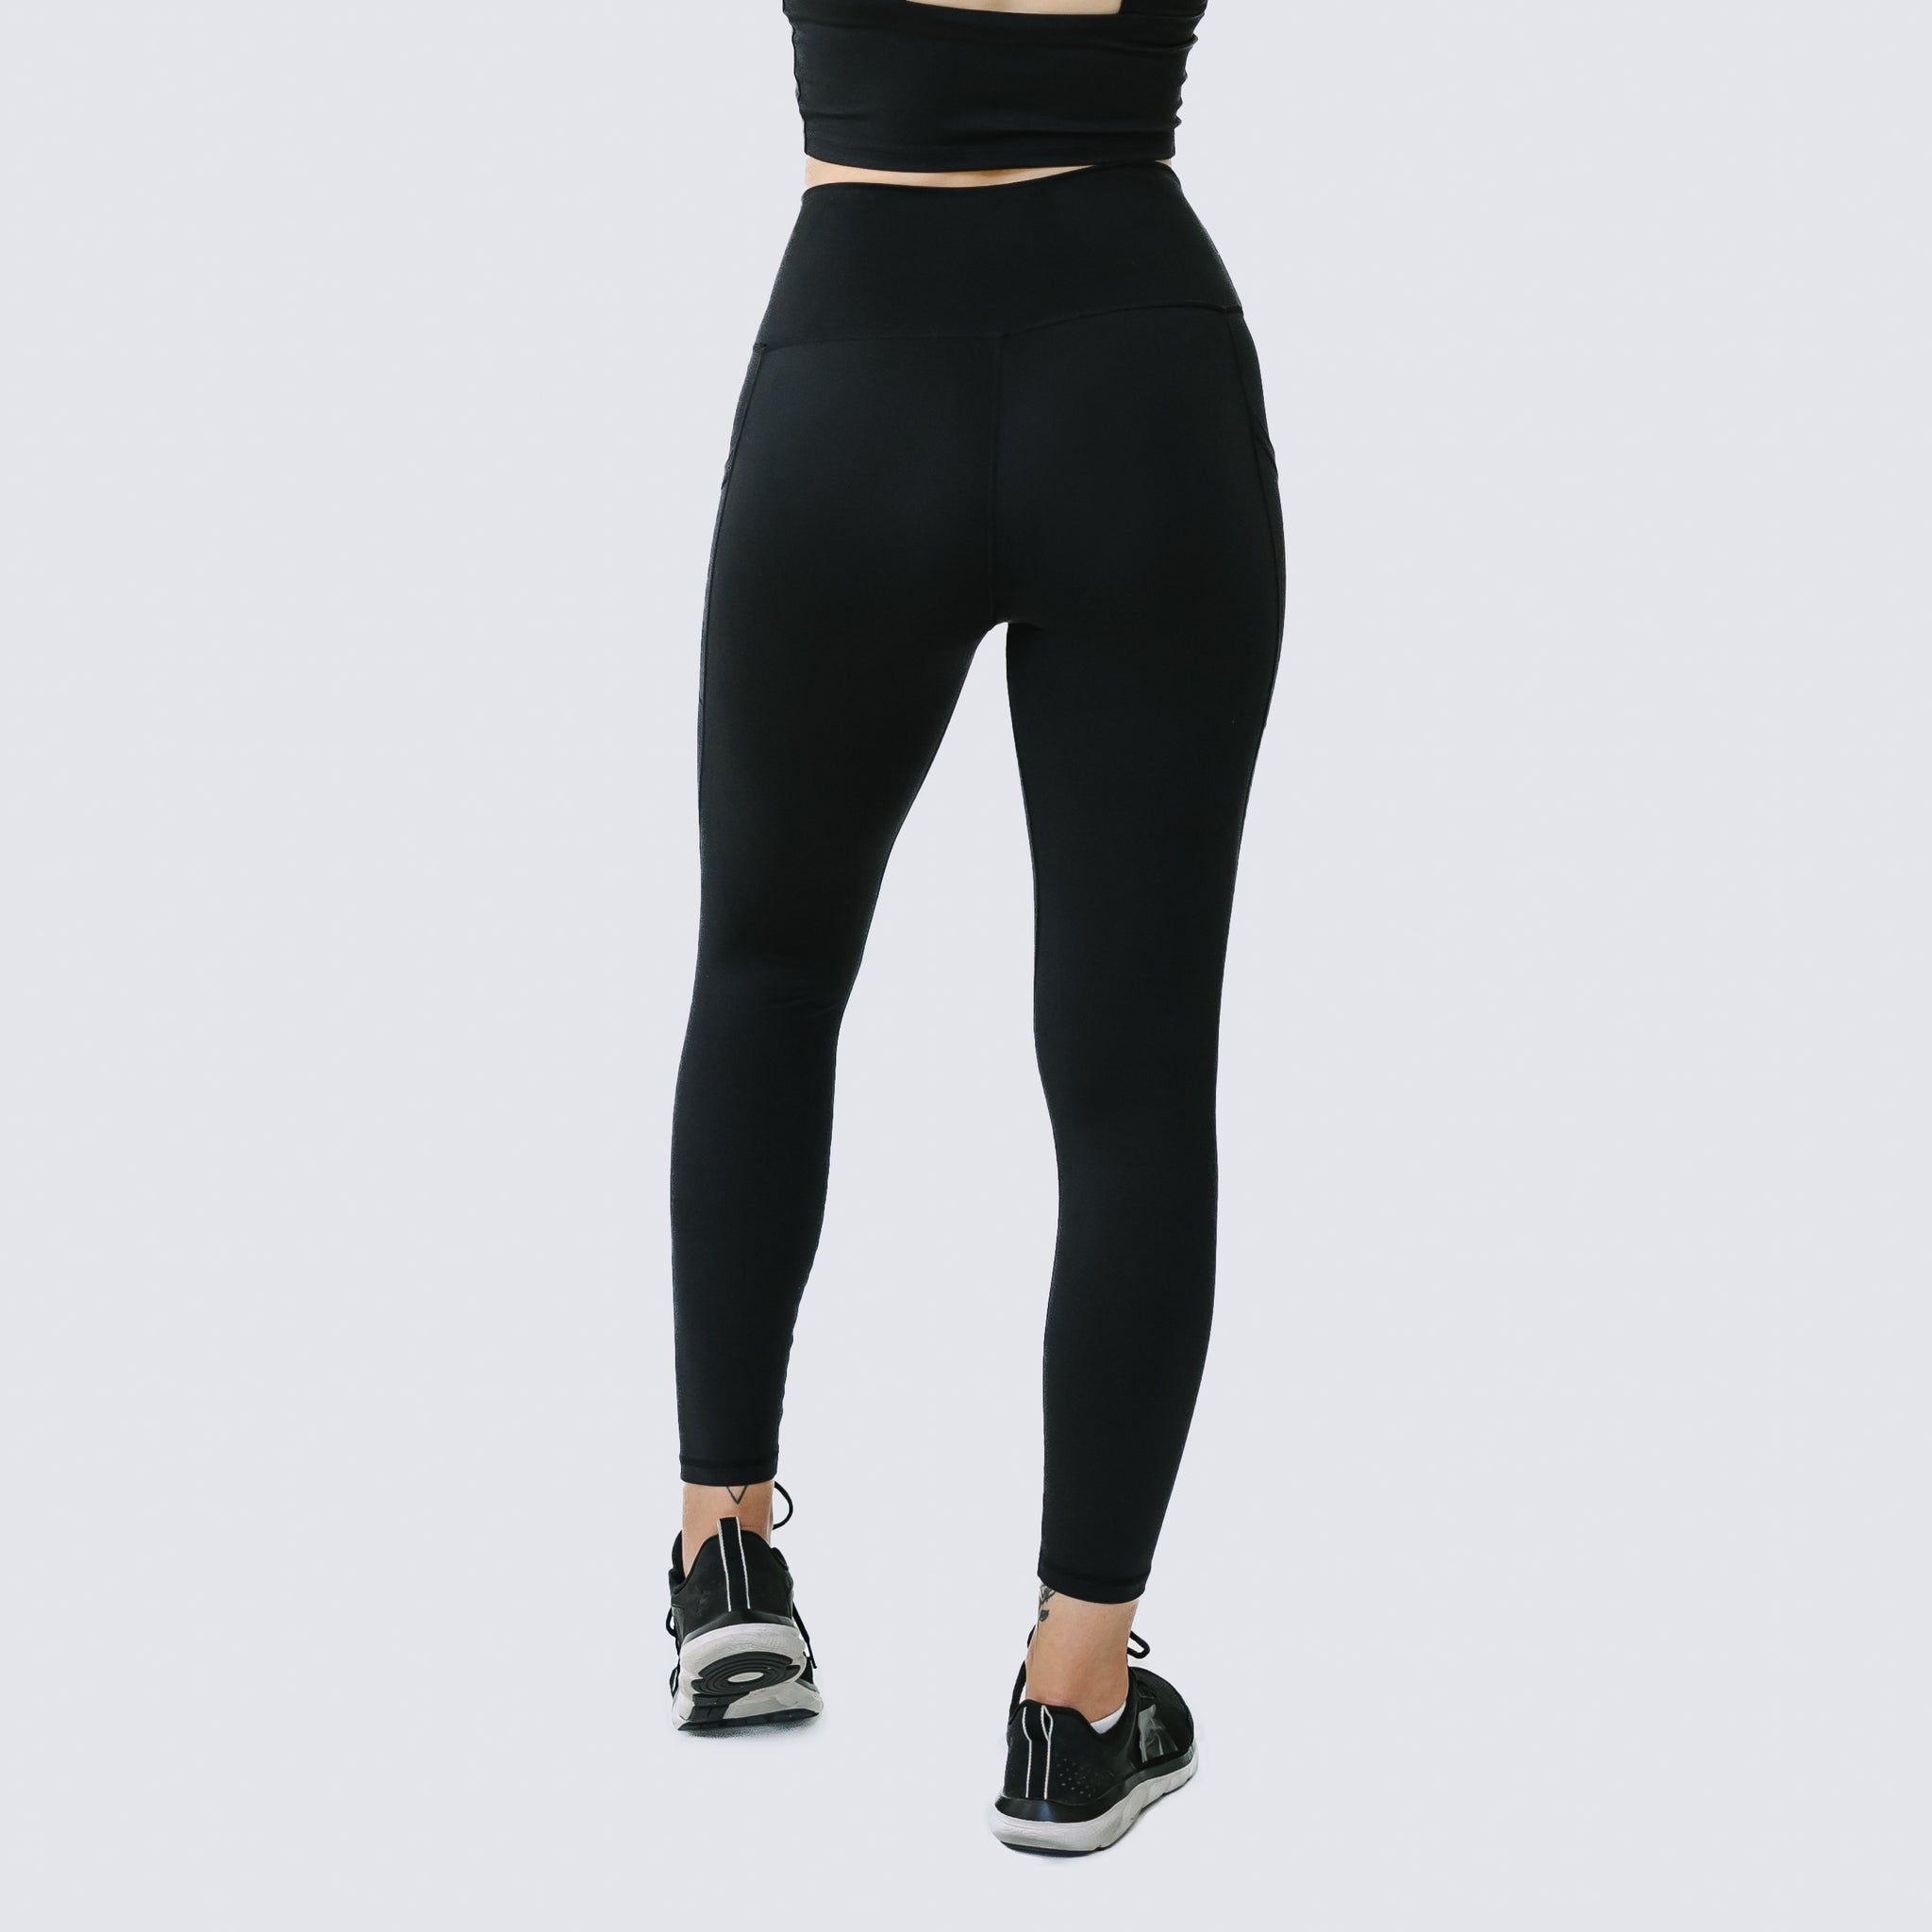 Stay stylish and comfortable with Smoothies Leggings